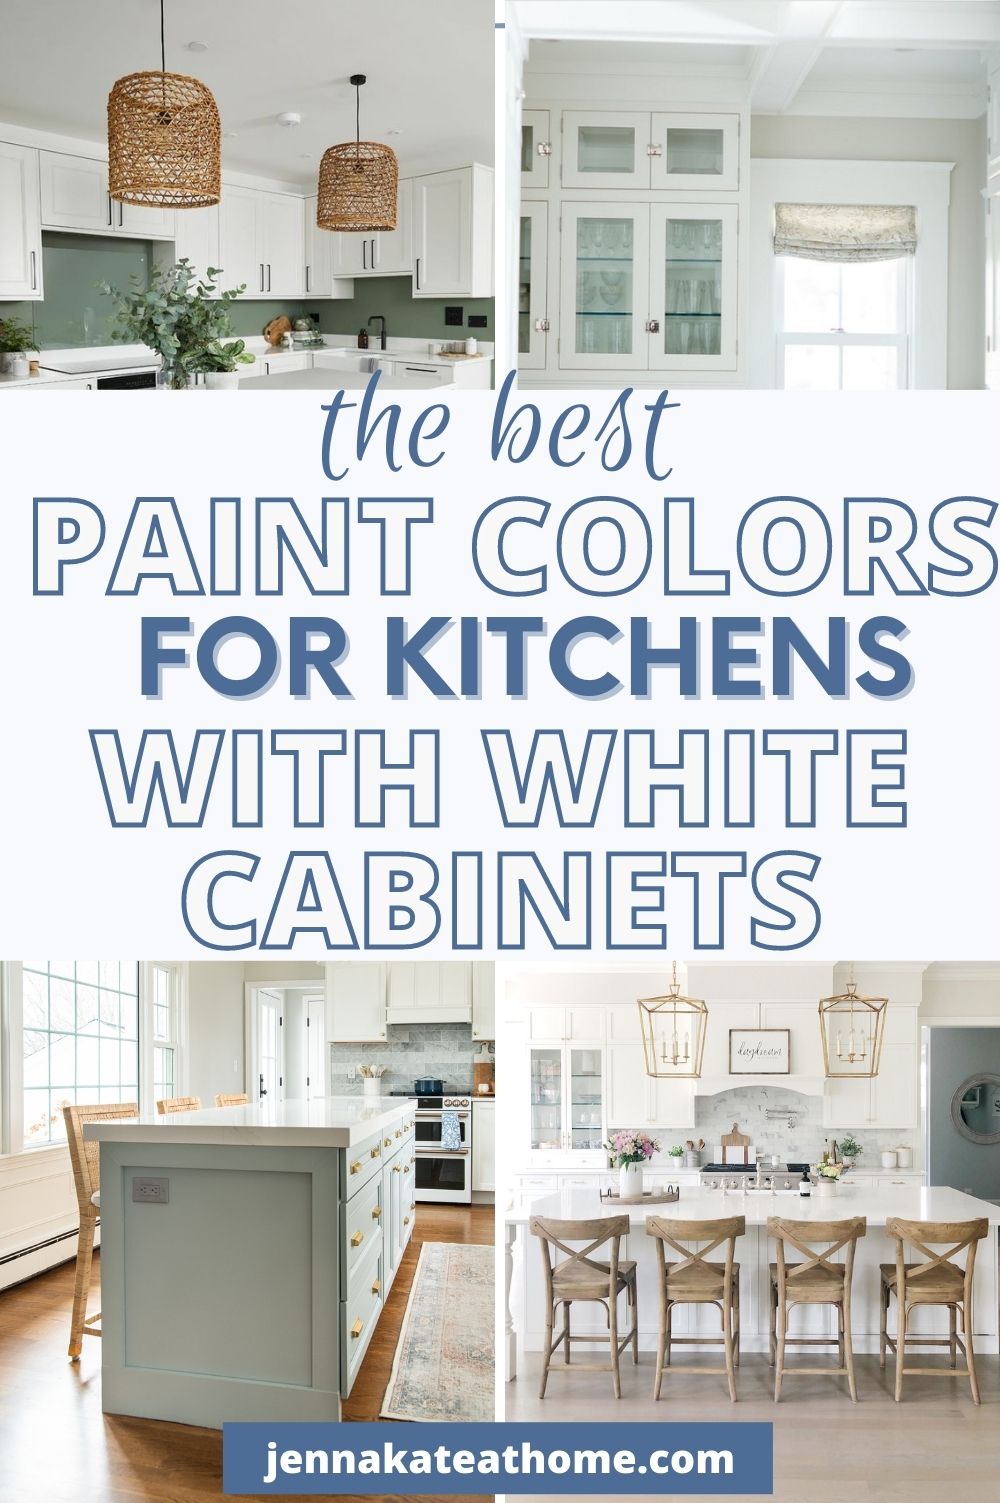 paint colors for kitchens with white cabinets pin image